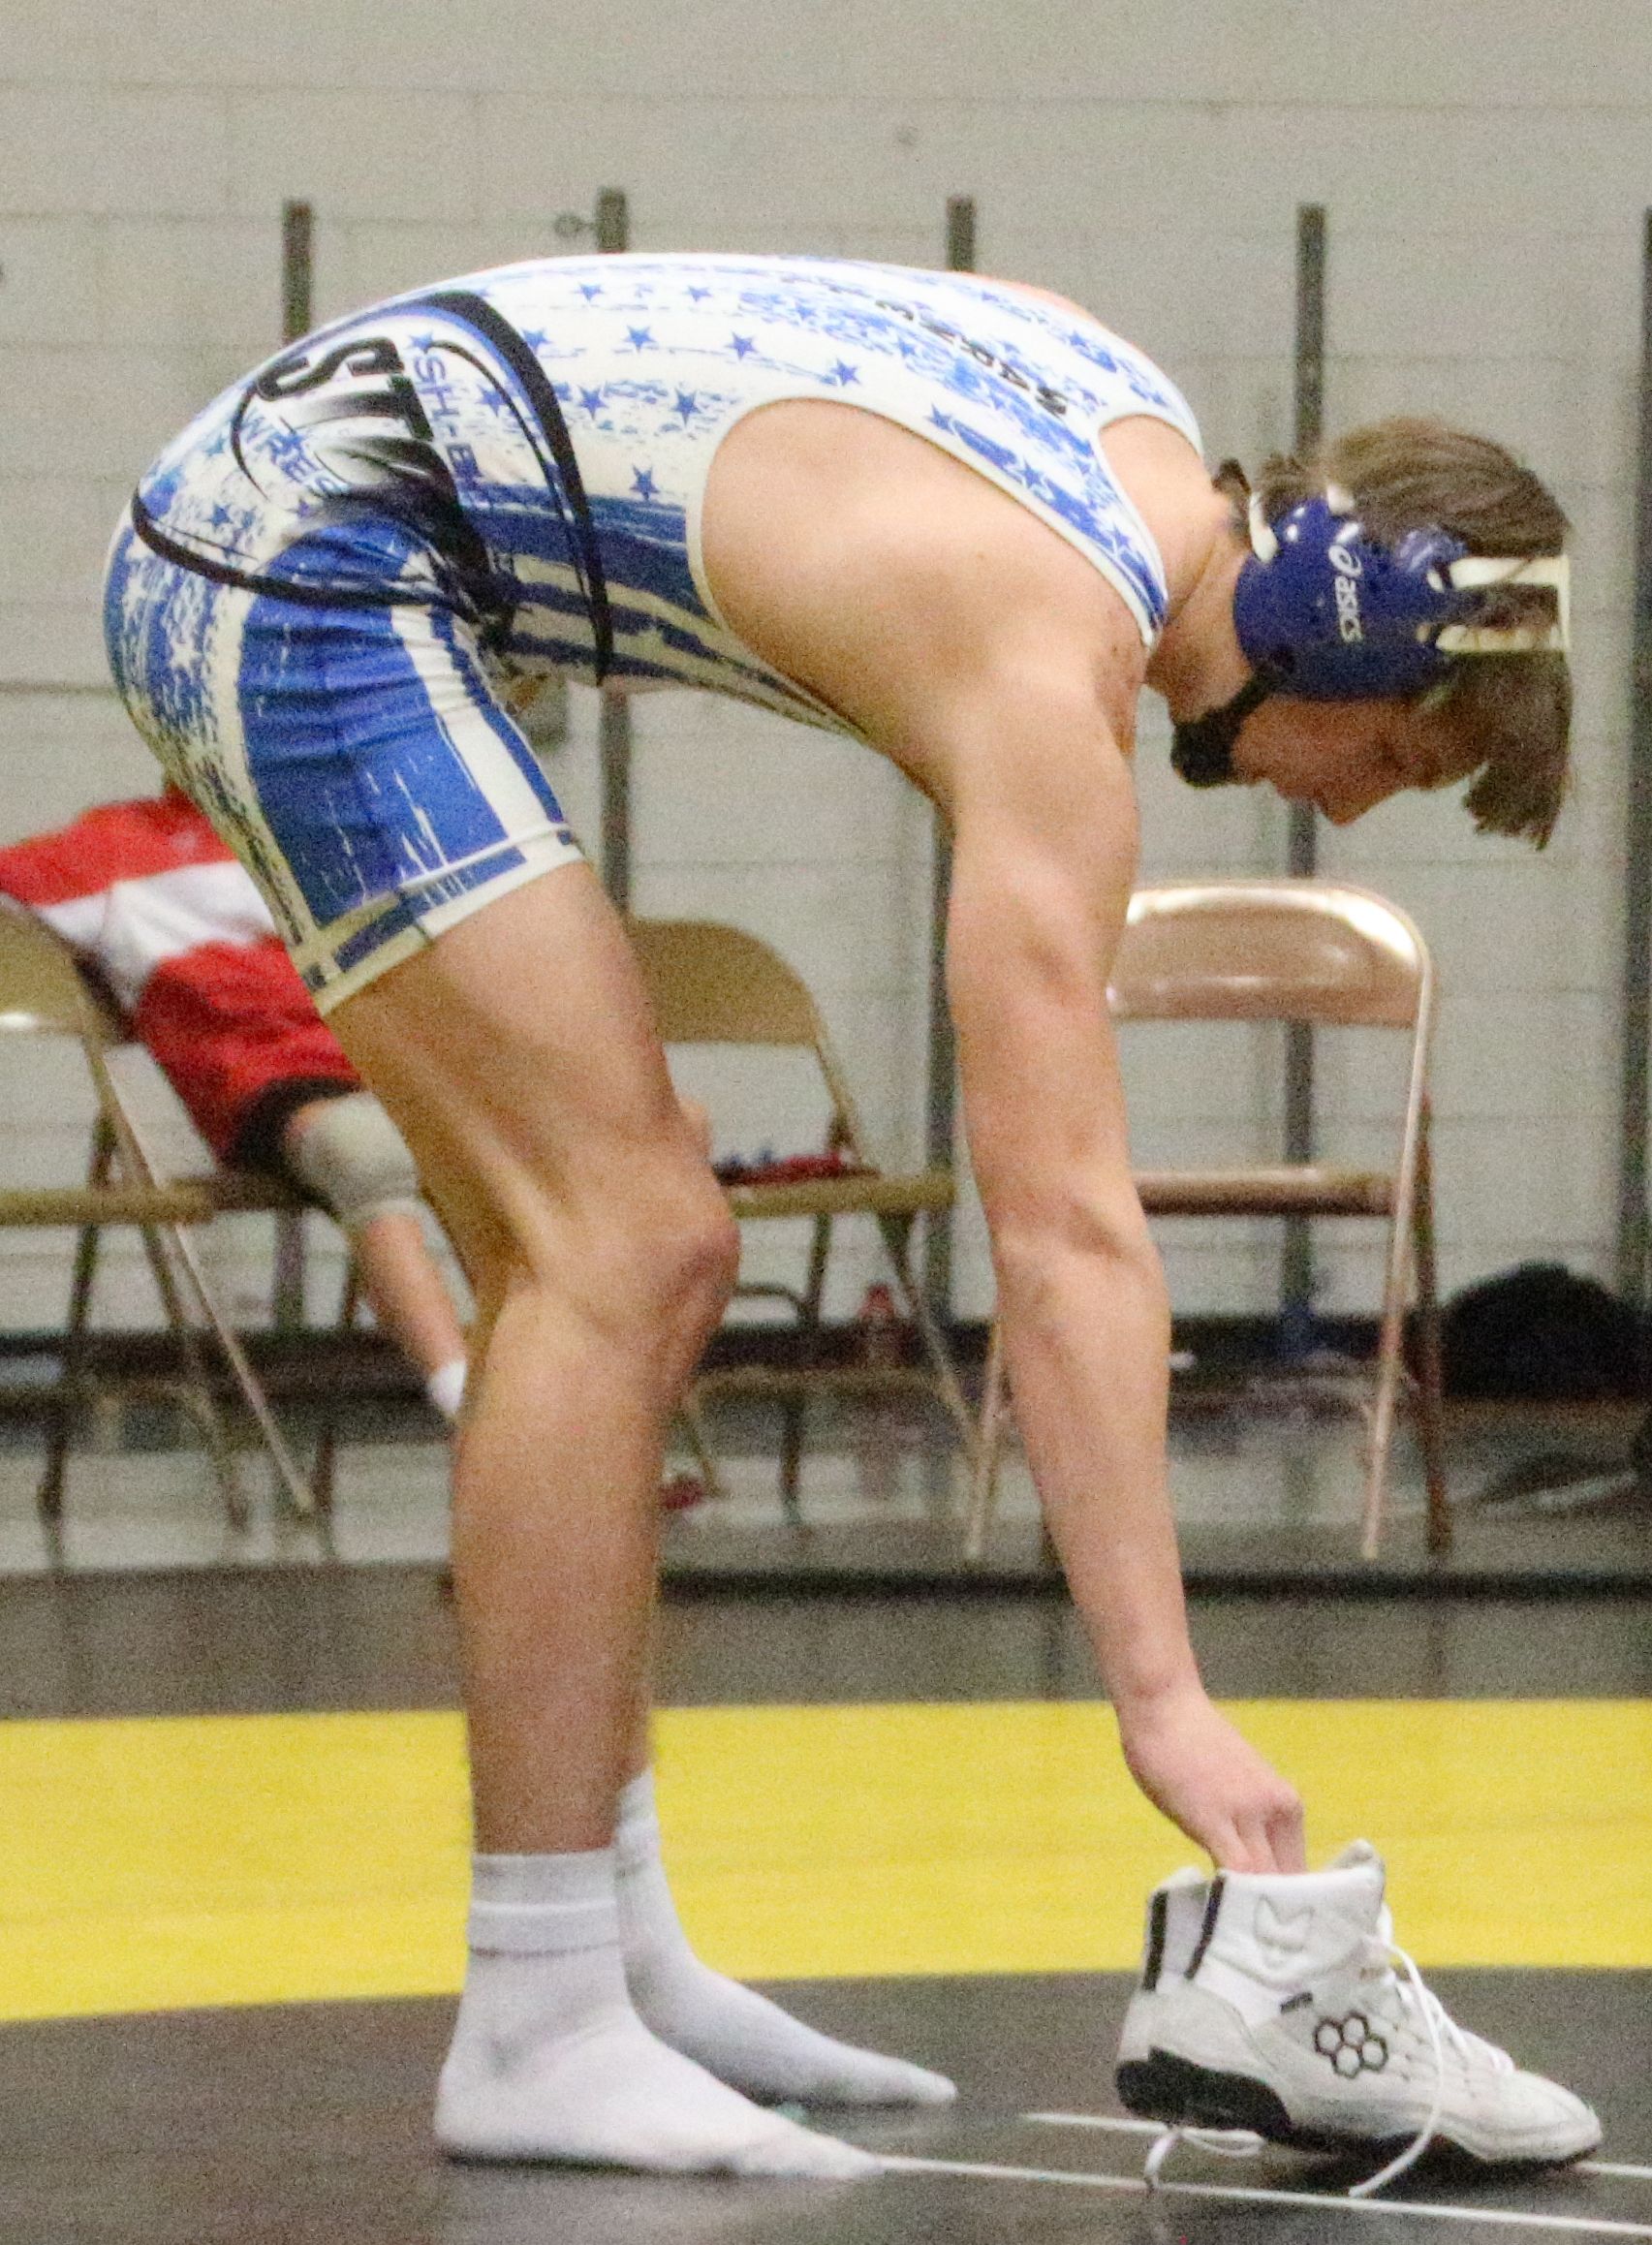 South Hardin-BCLUW senior Logan Aicher leaves his shoes at the center of the mat to symbolize the end of his high school wrestling career after injuries sustained in a car accident in the summer of 2021. (Jake Ryder photo)